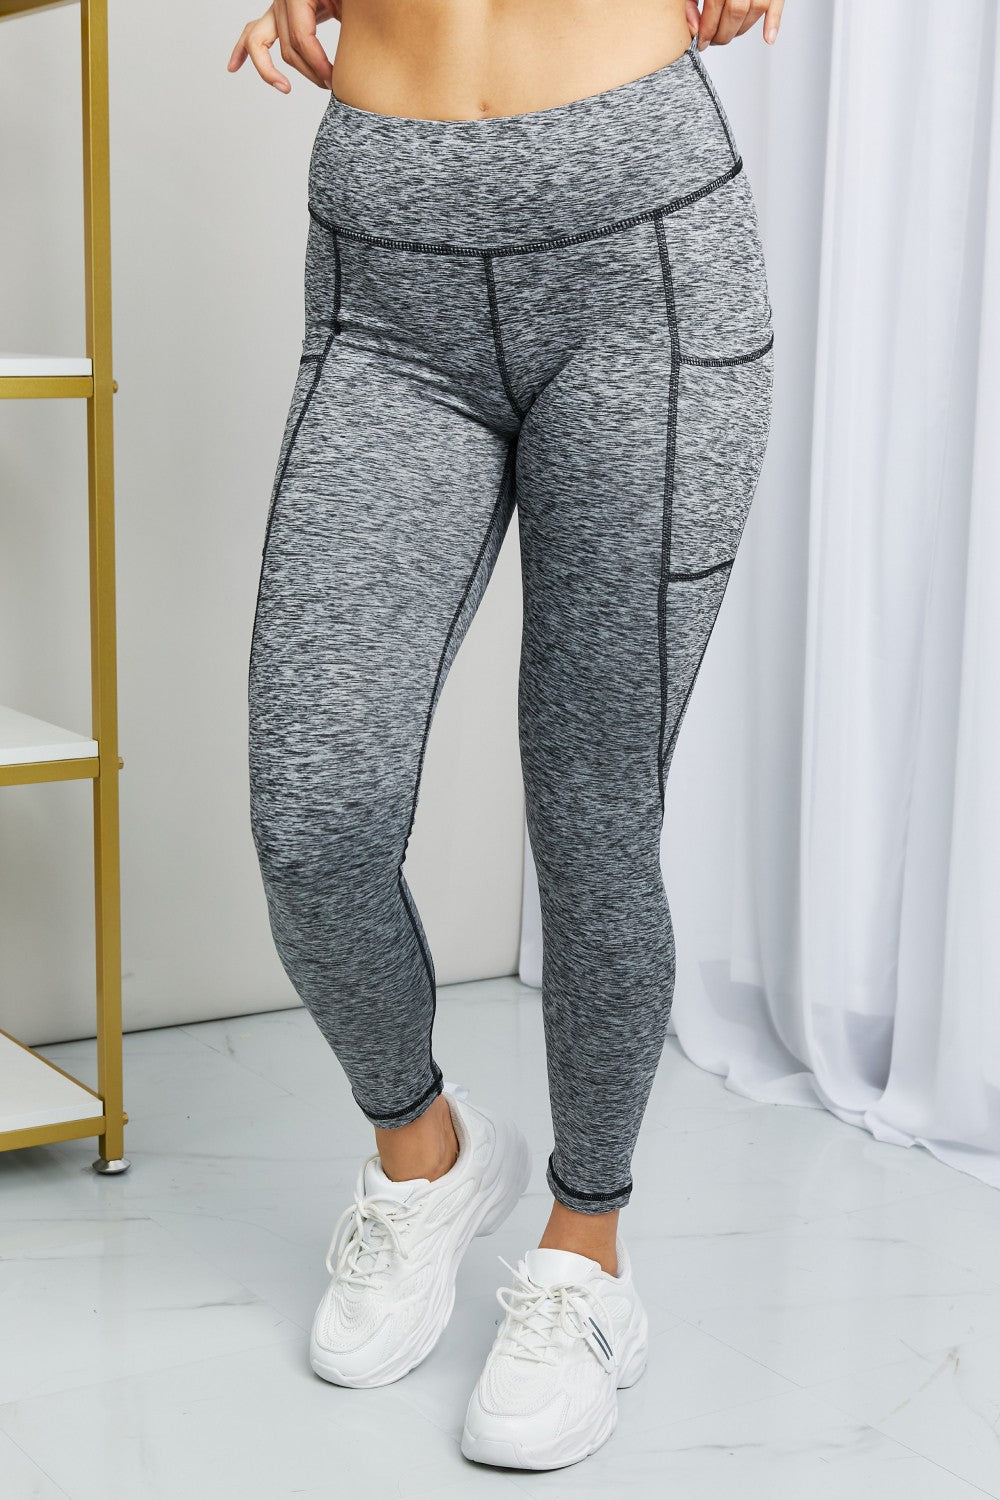 BLACK GRAY - Rae Mode Full Size Heathered Wide Waistband Yoga Leggings - Ships from The US - womens leggings at TFC&H Co.